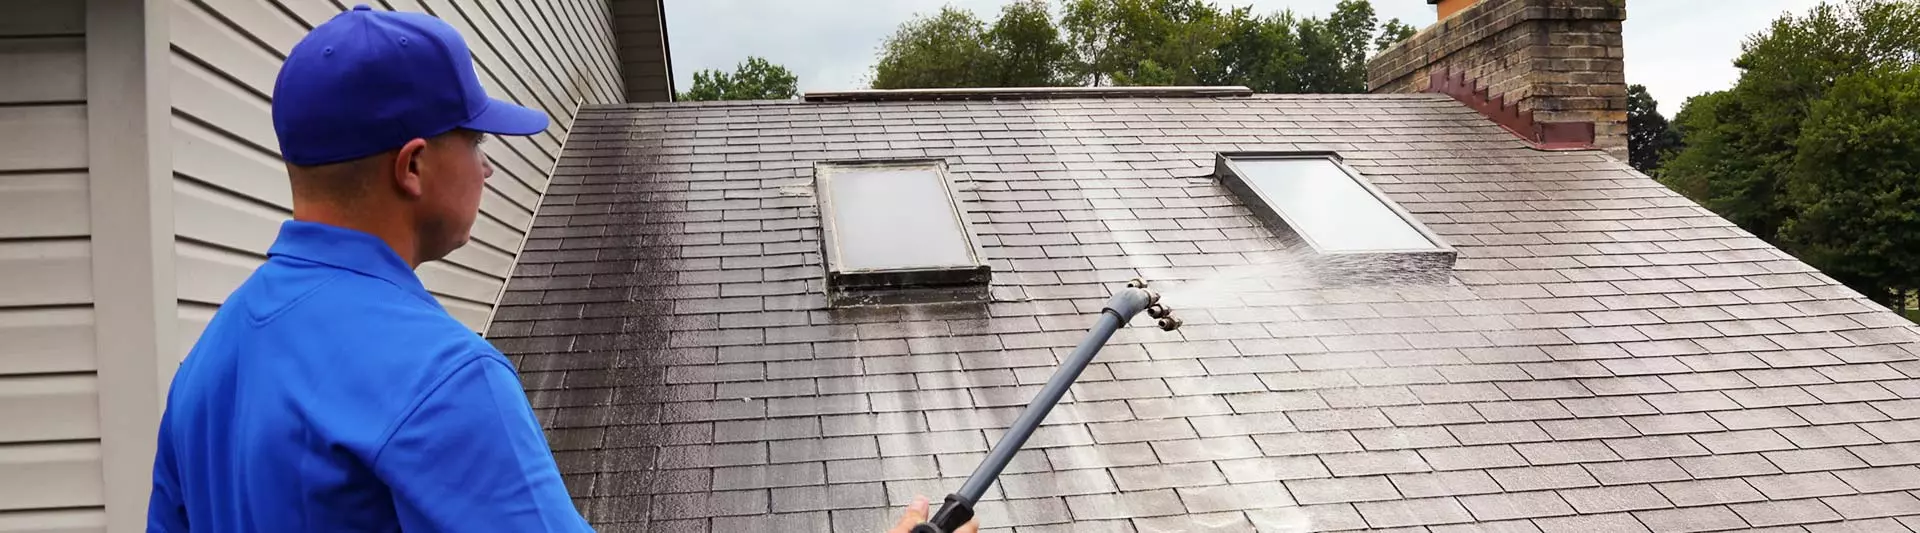 A-quick Pressure Washing Roof Cleaning Service Mount Vernon Wa